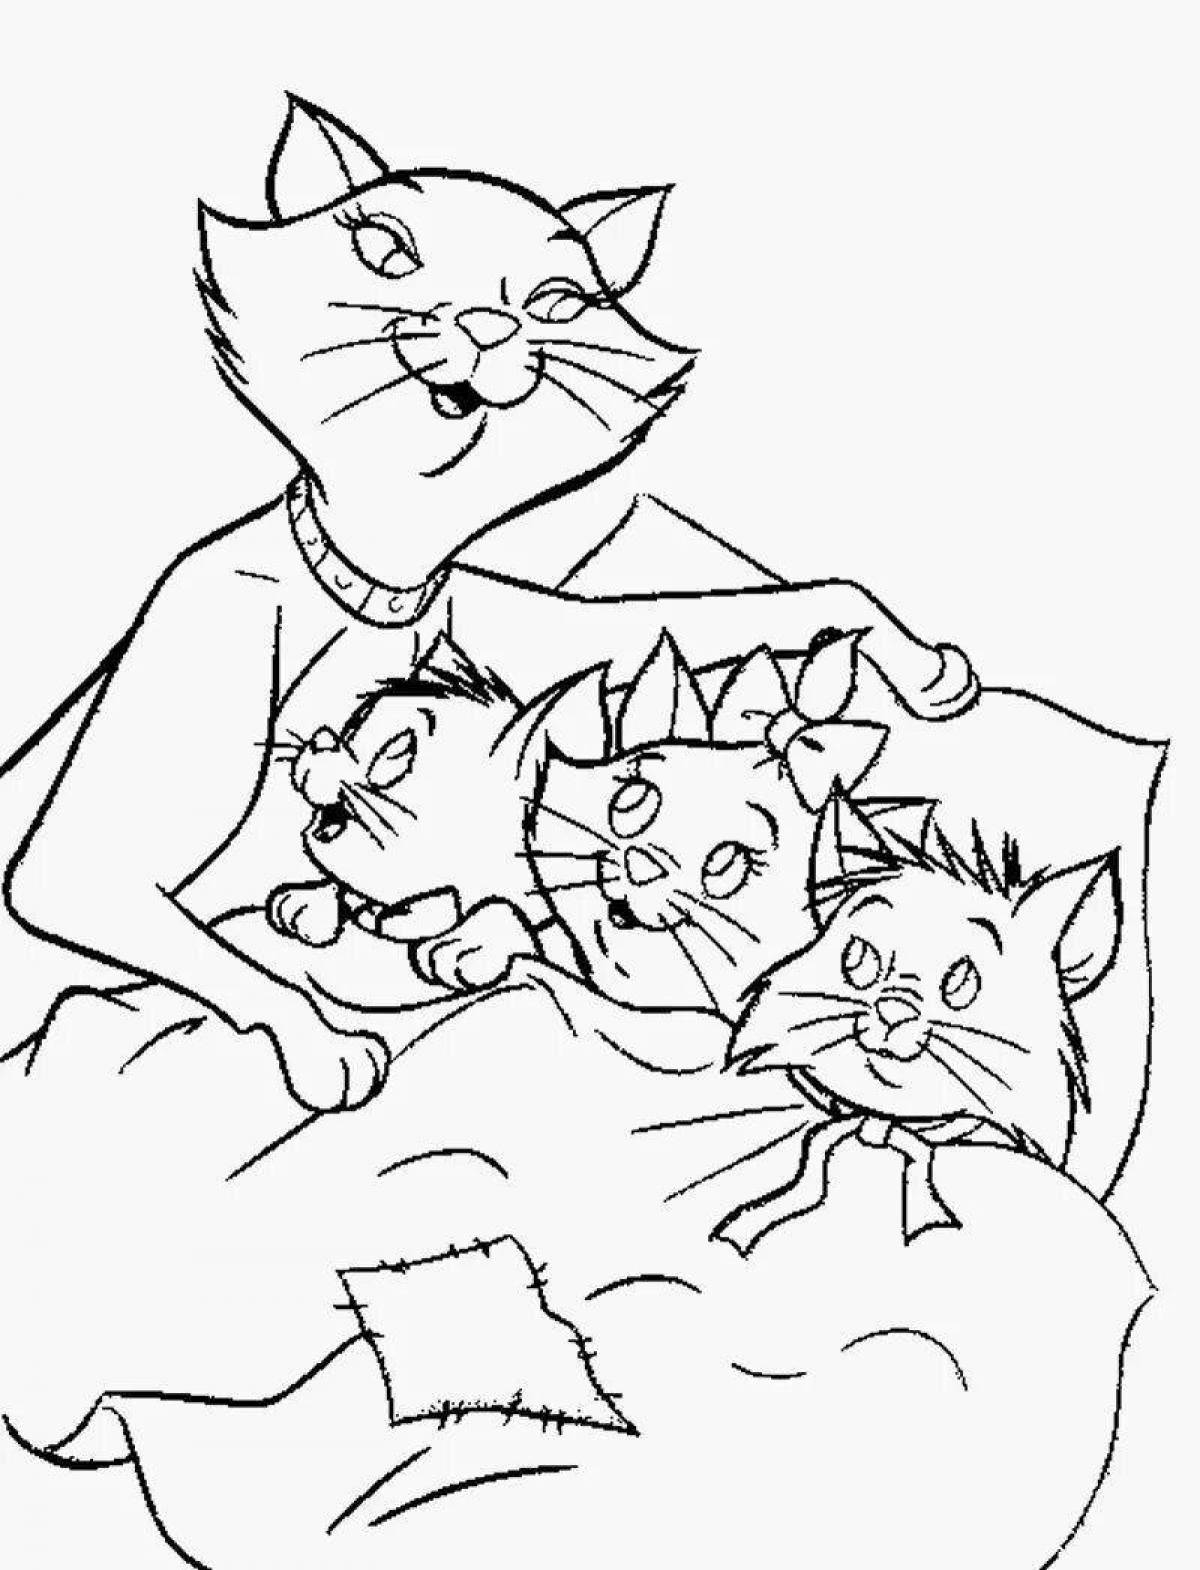 Coloring page adorable cat family